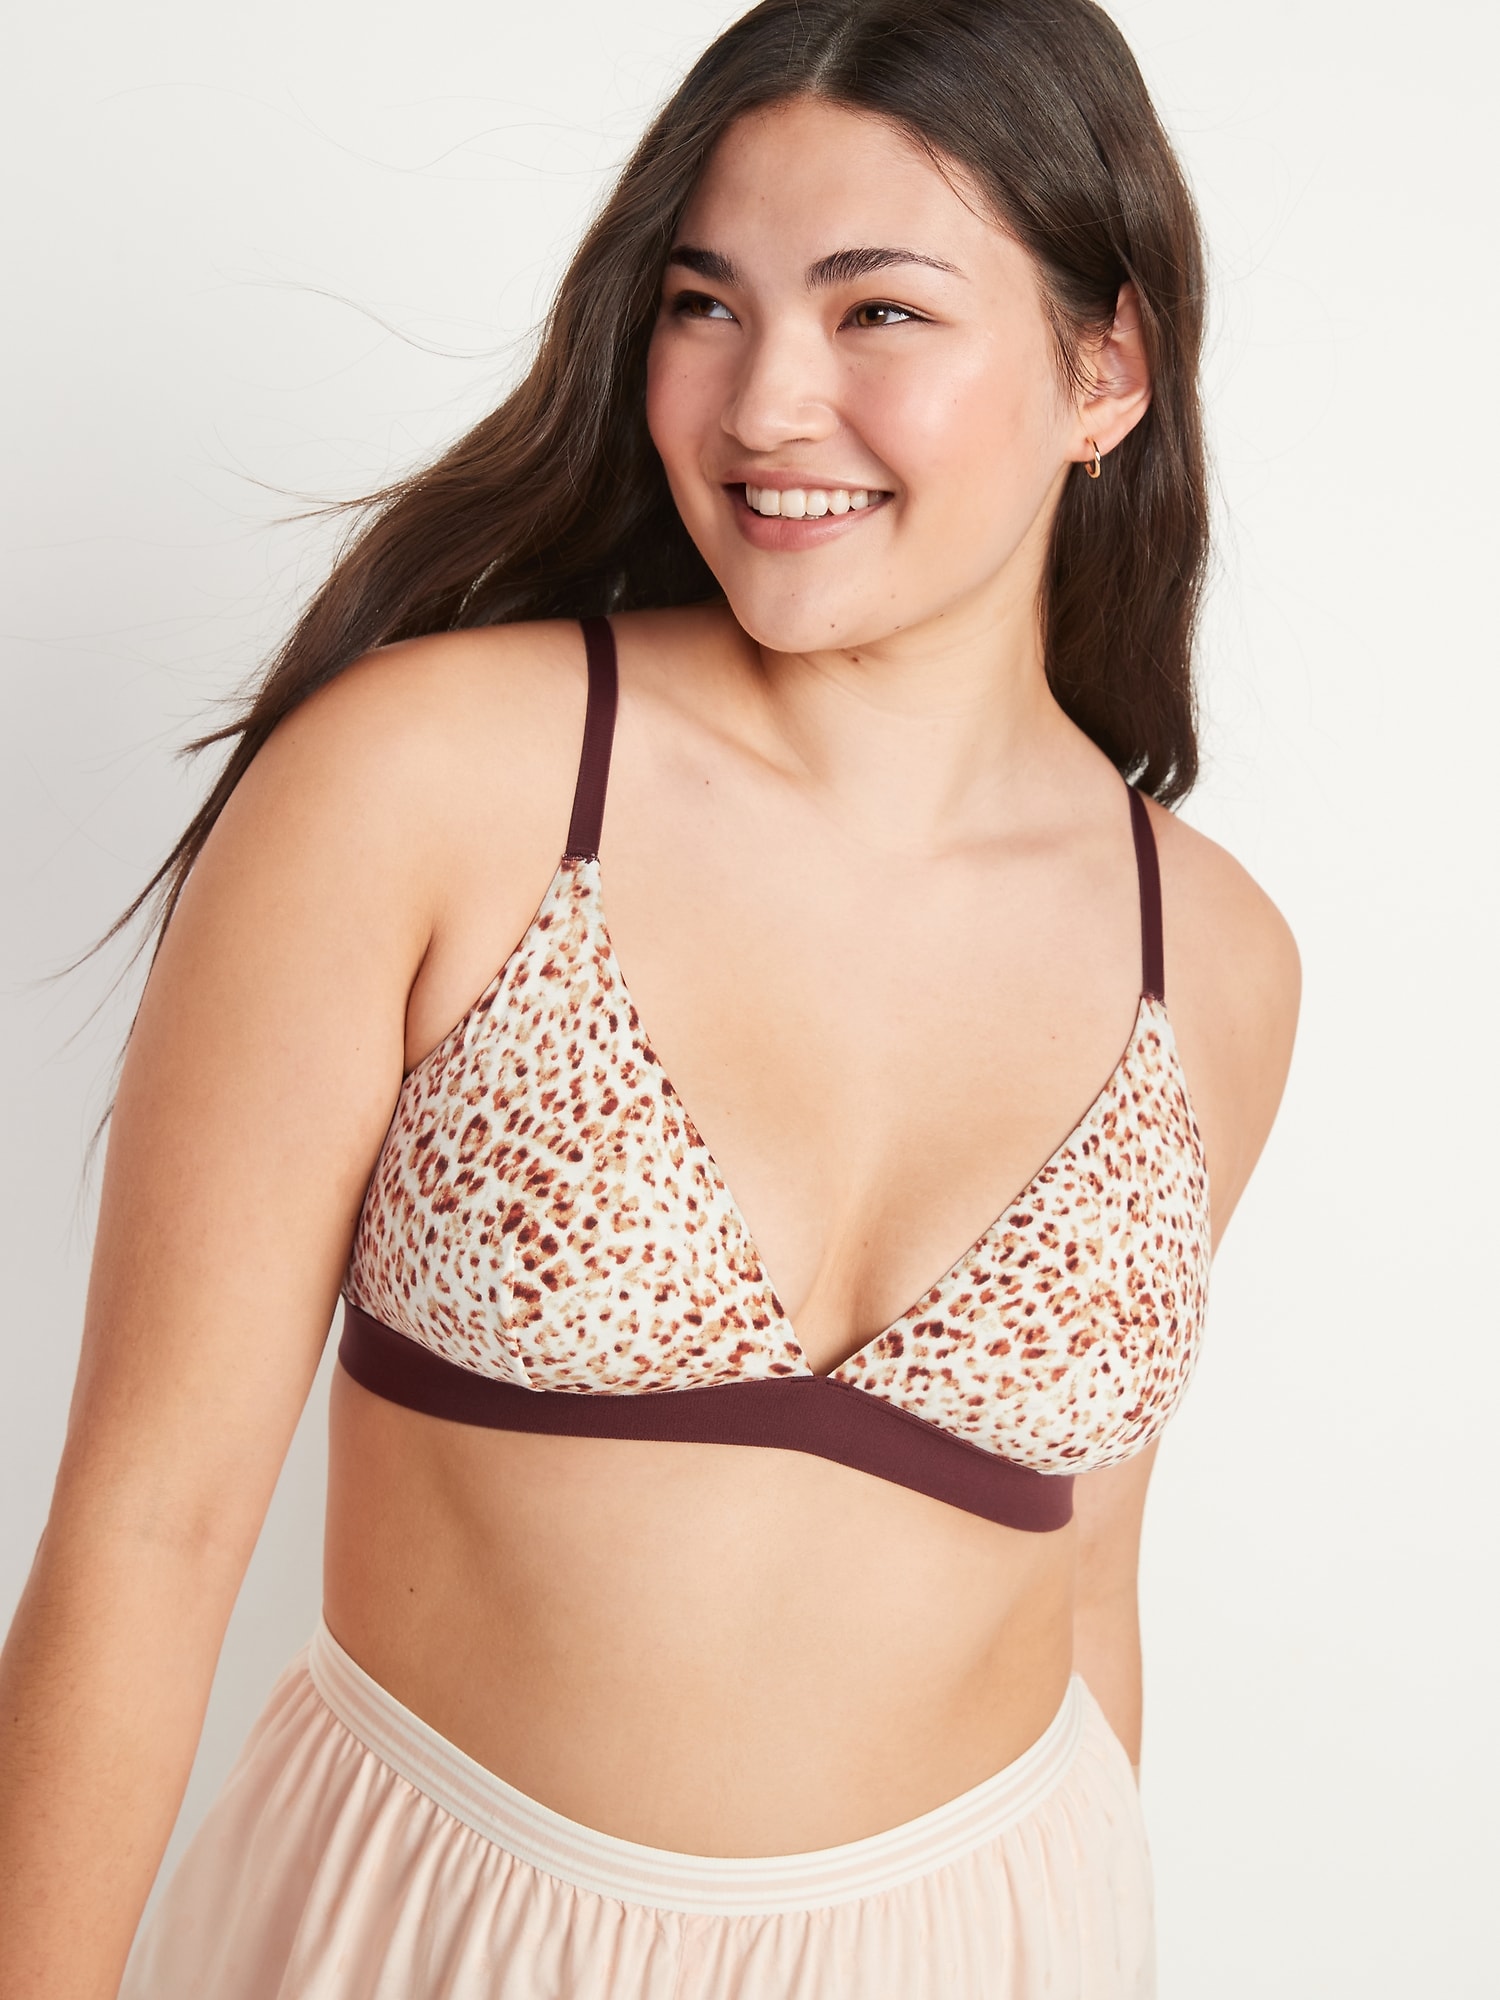 Old Navy - Supima® Cotton-Blend Triangle Bralette Top for Women pink